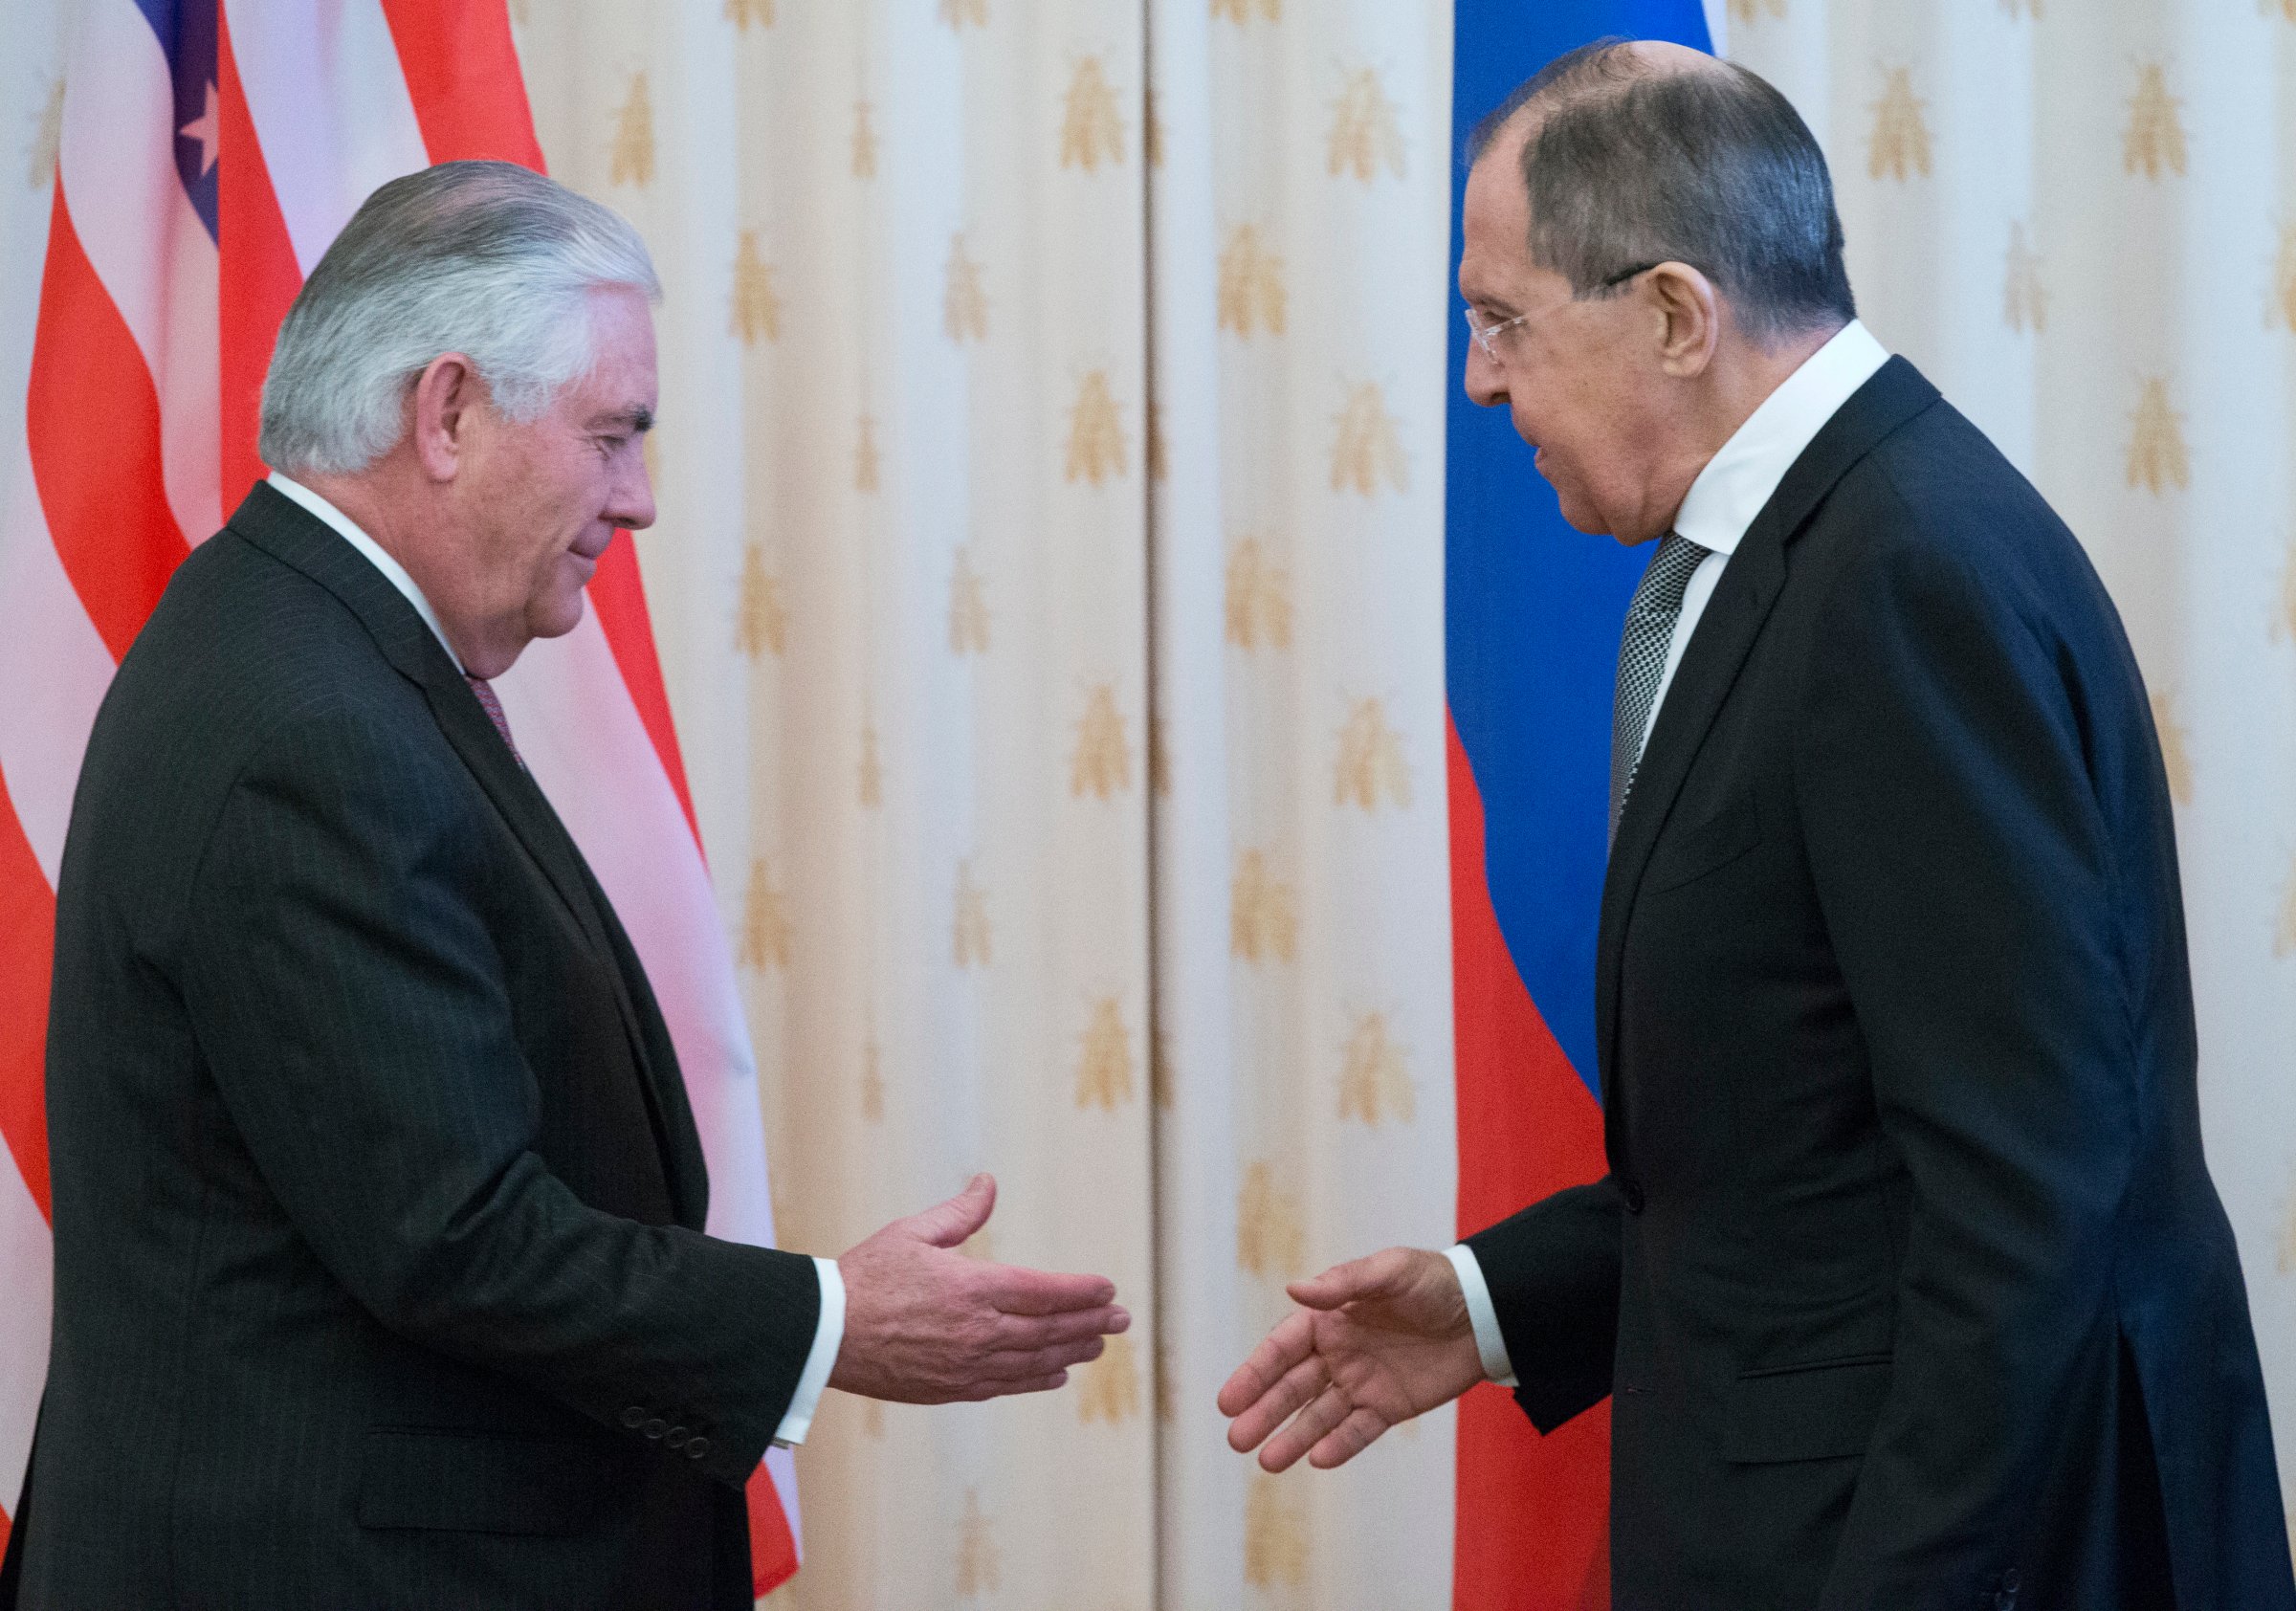 Secretary of State Rex Tillerson, left, and Russian Foreign Minister Sergey Lavrov shake hands prior to their talks in Moscow, April 12, 2017.